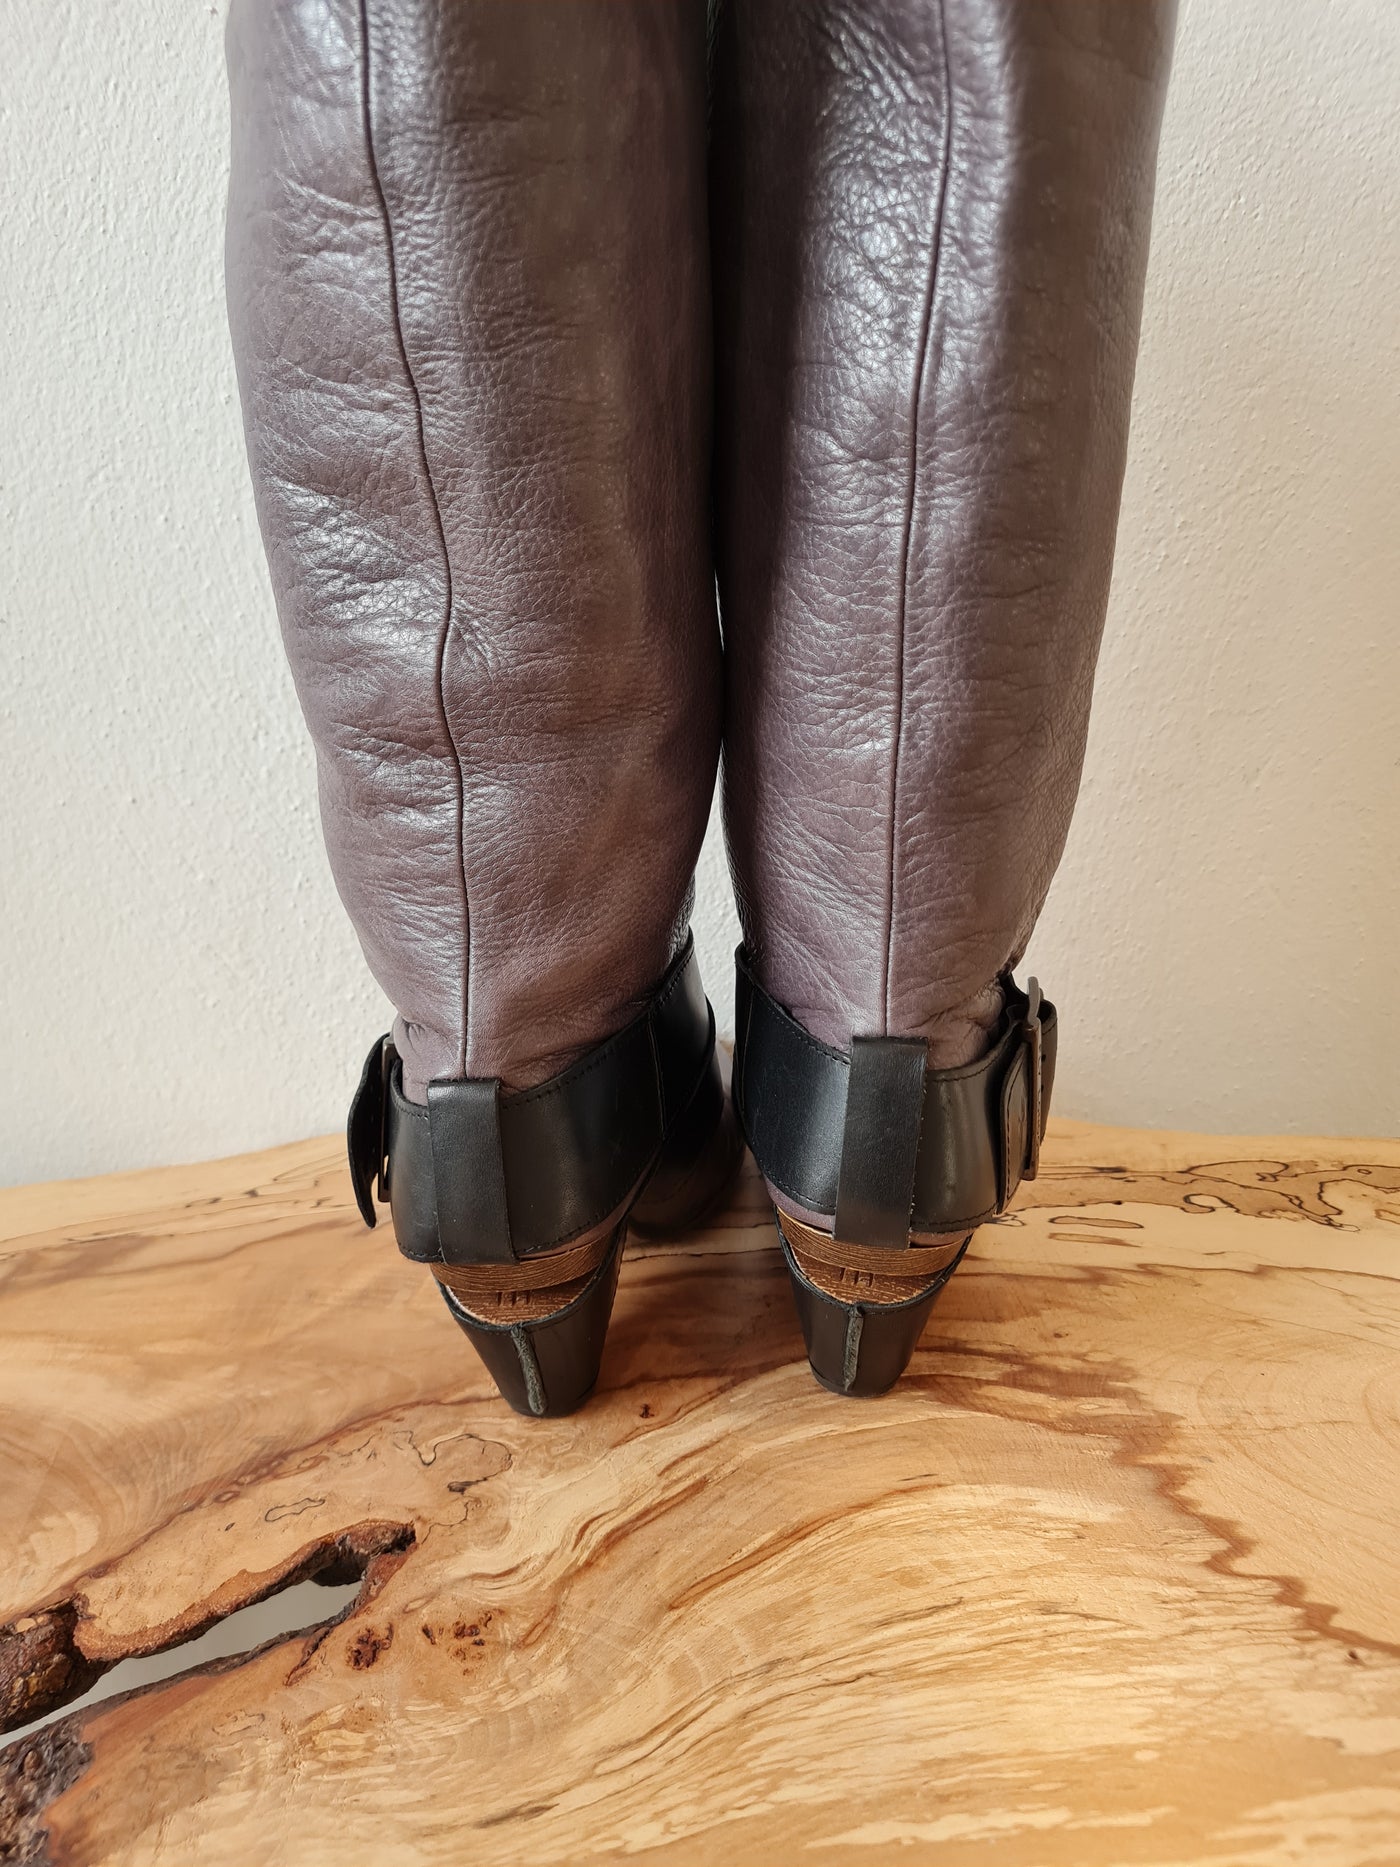 Fly London grey knee boots 6